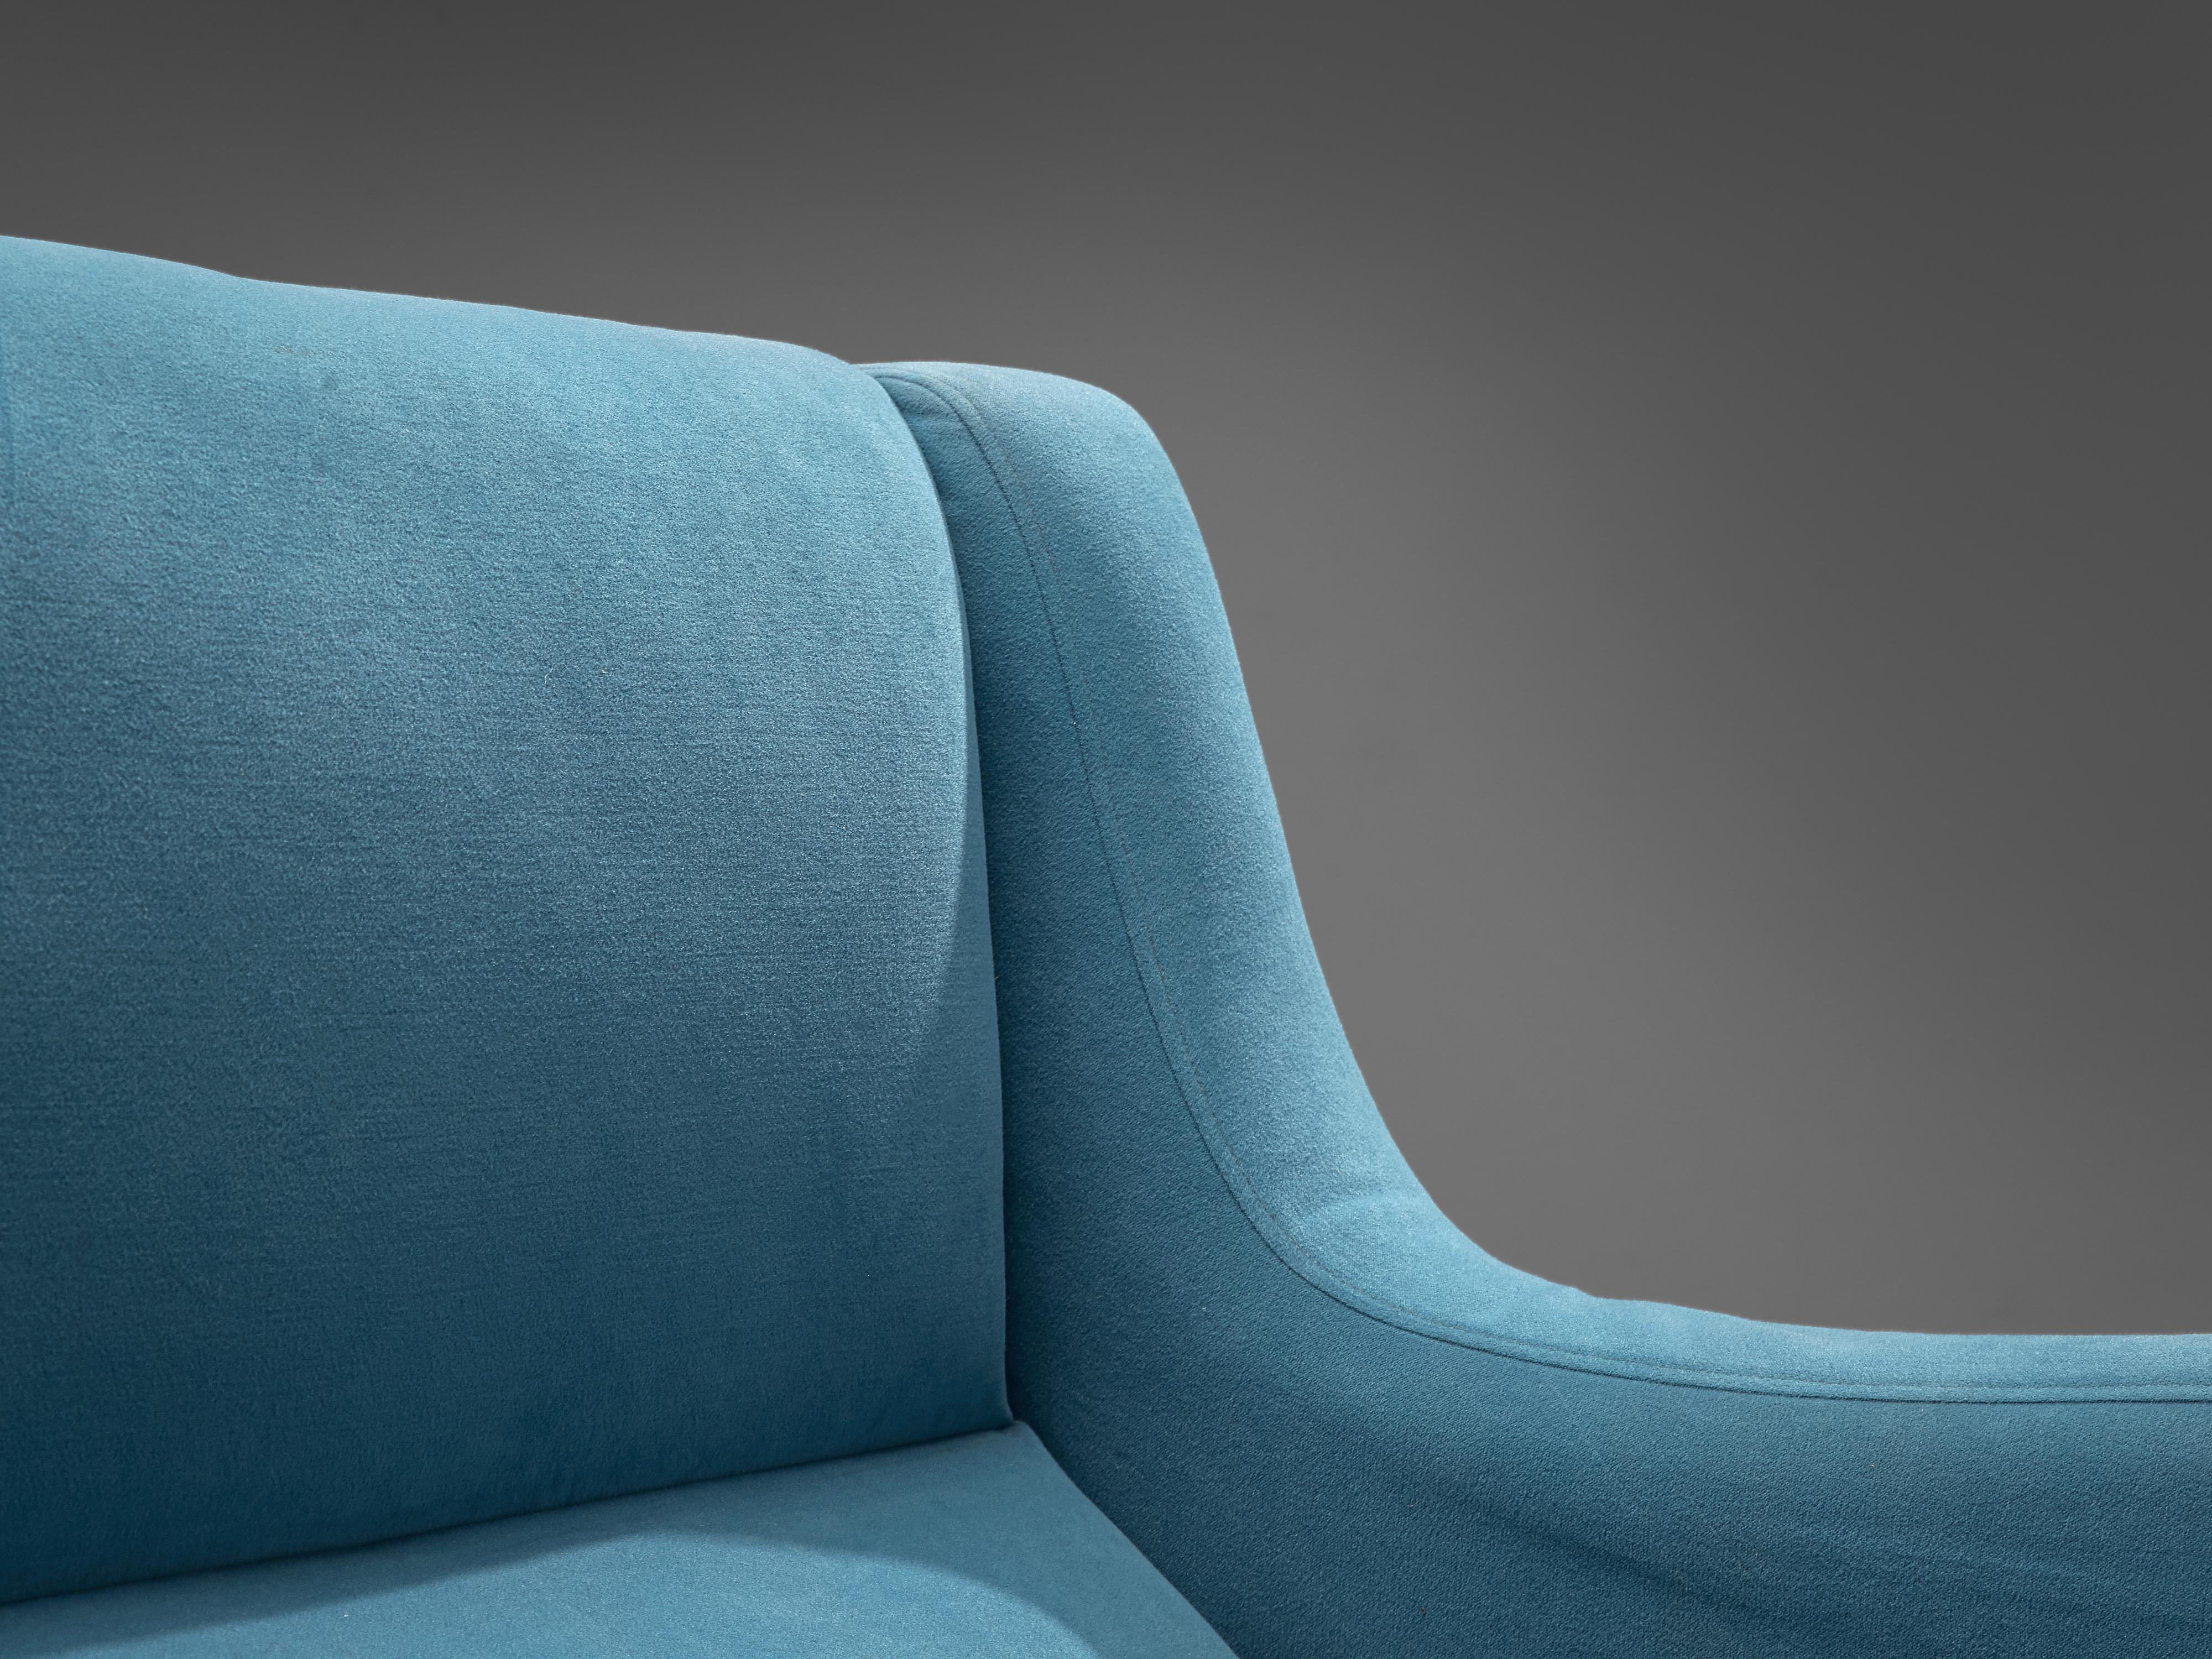 Mid-20th Century Italian Pair of Lounge Chairs in Bright Blue Upholstery